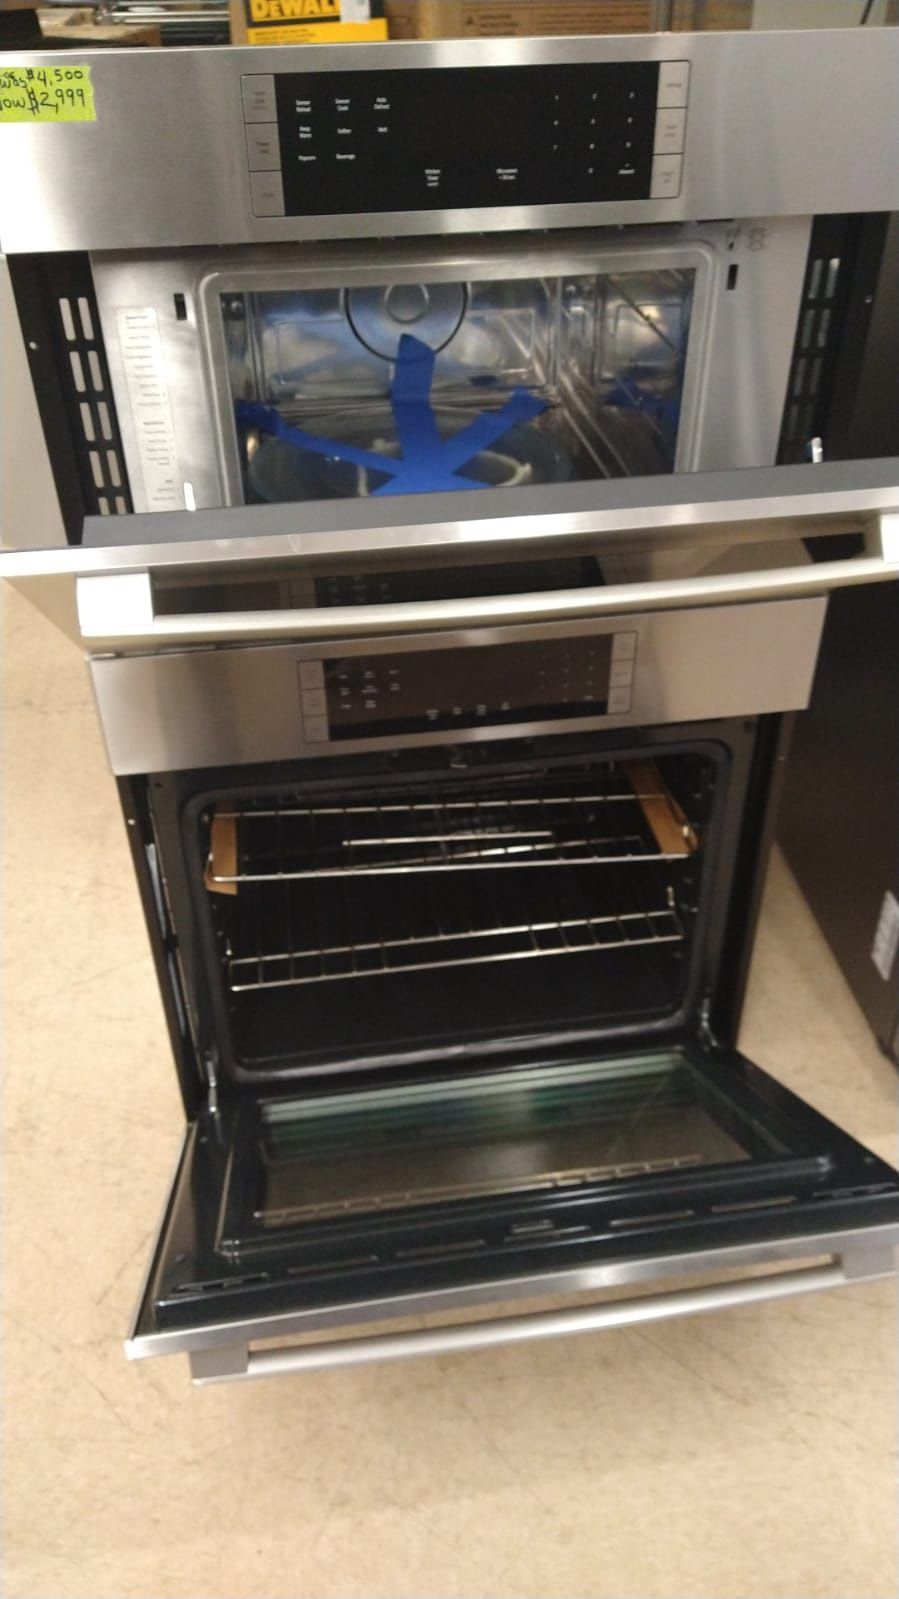 New Bosch Oven/Microwave Built In Excellent Conditions 1 Year Warranty 